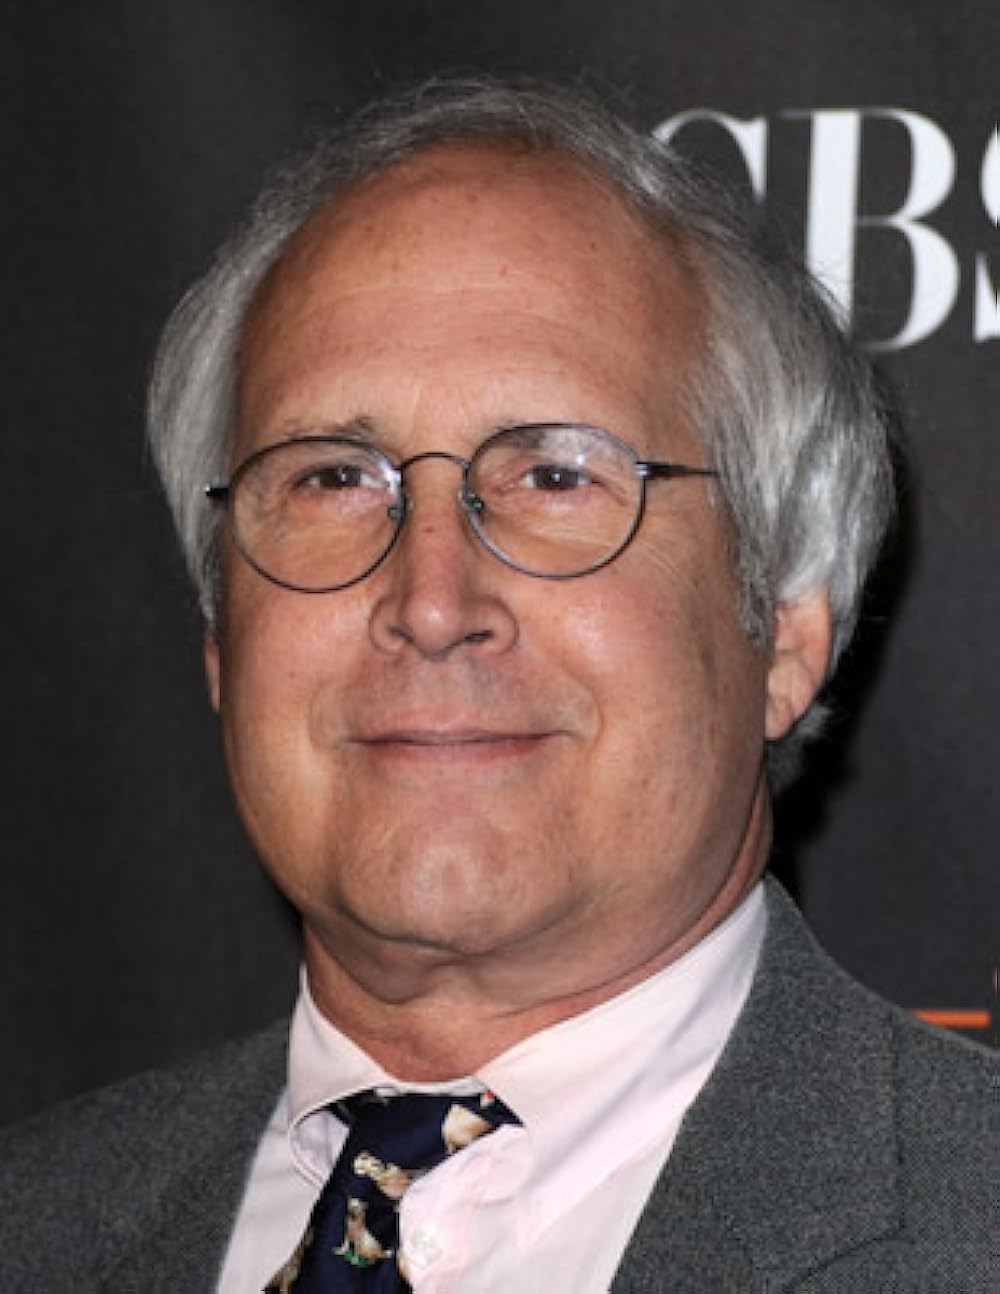 Chevy Chase alive and kicking